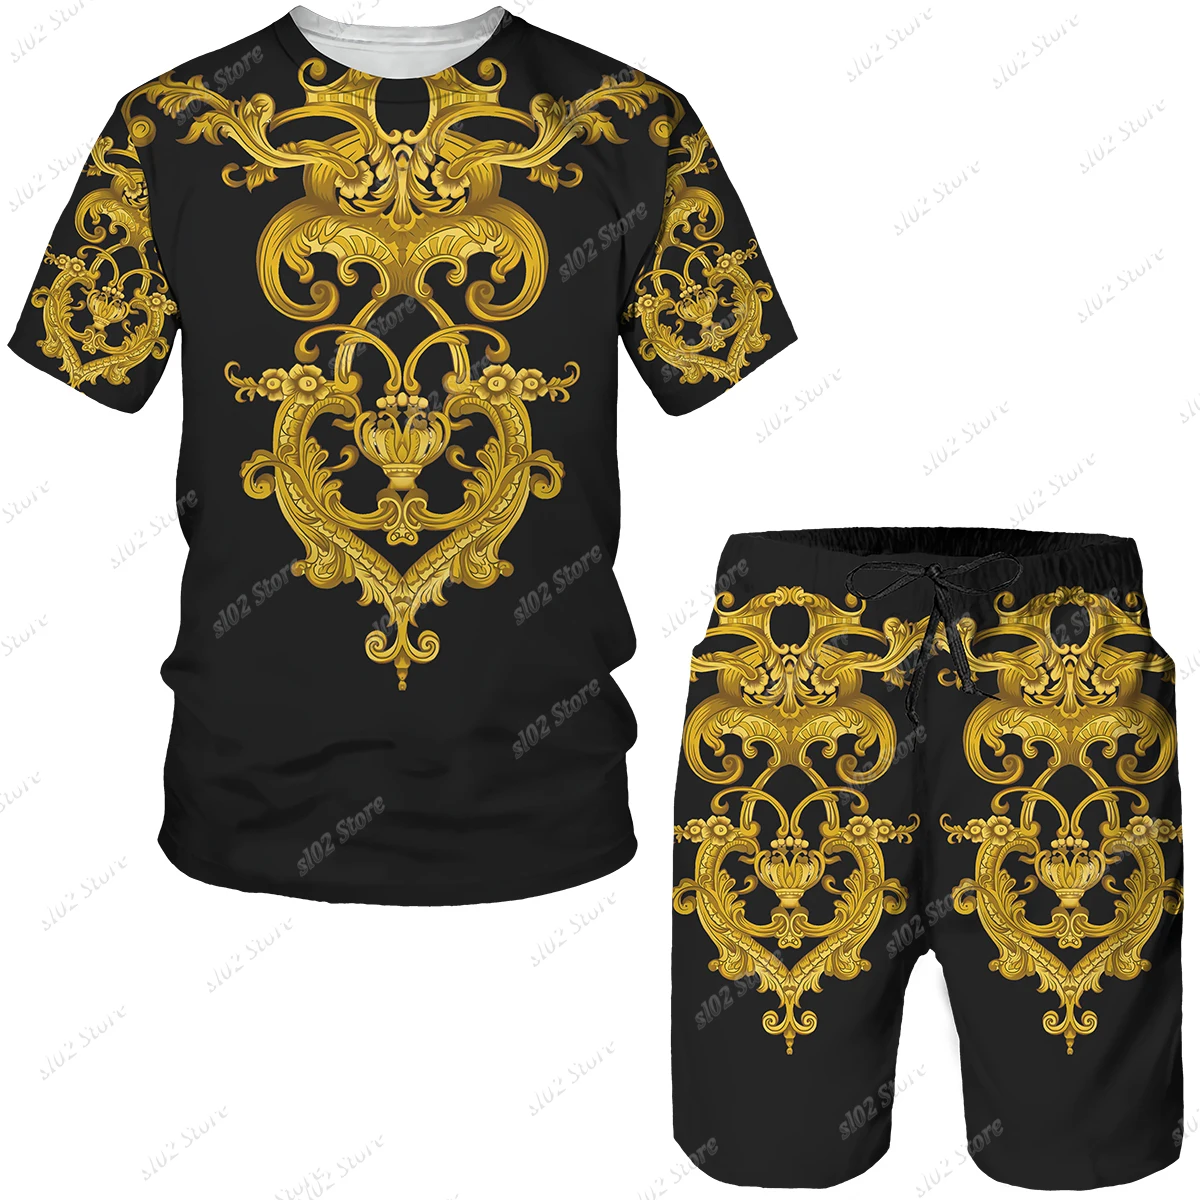 Summer Men's Clothing T-Shirts Shorts Tracksuits Sets 3d Golden Pattern Lion Head Printed Sportswear Man Jogging 2 Piece Outfit images - 6